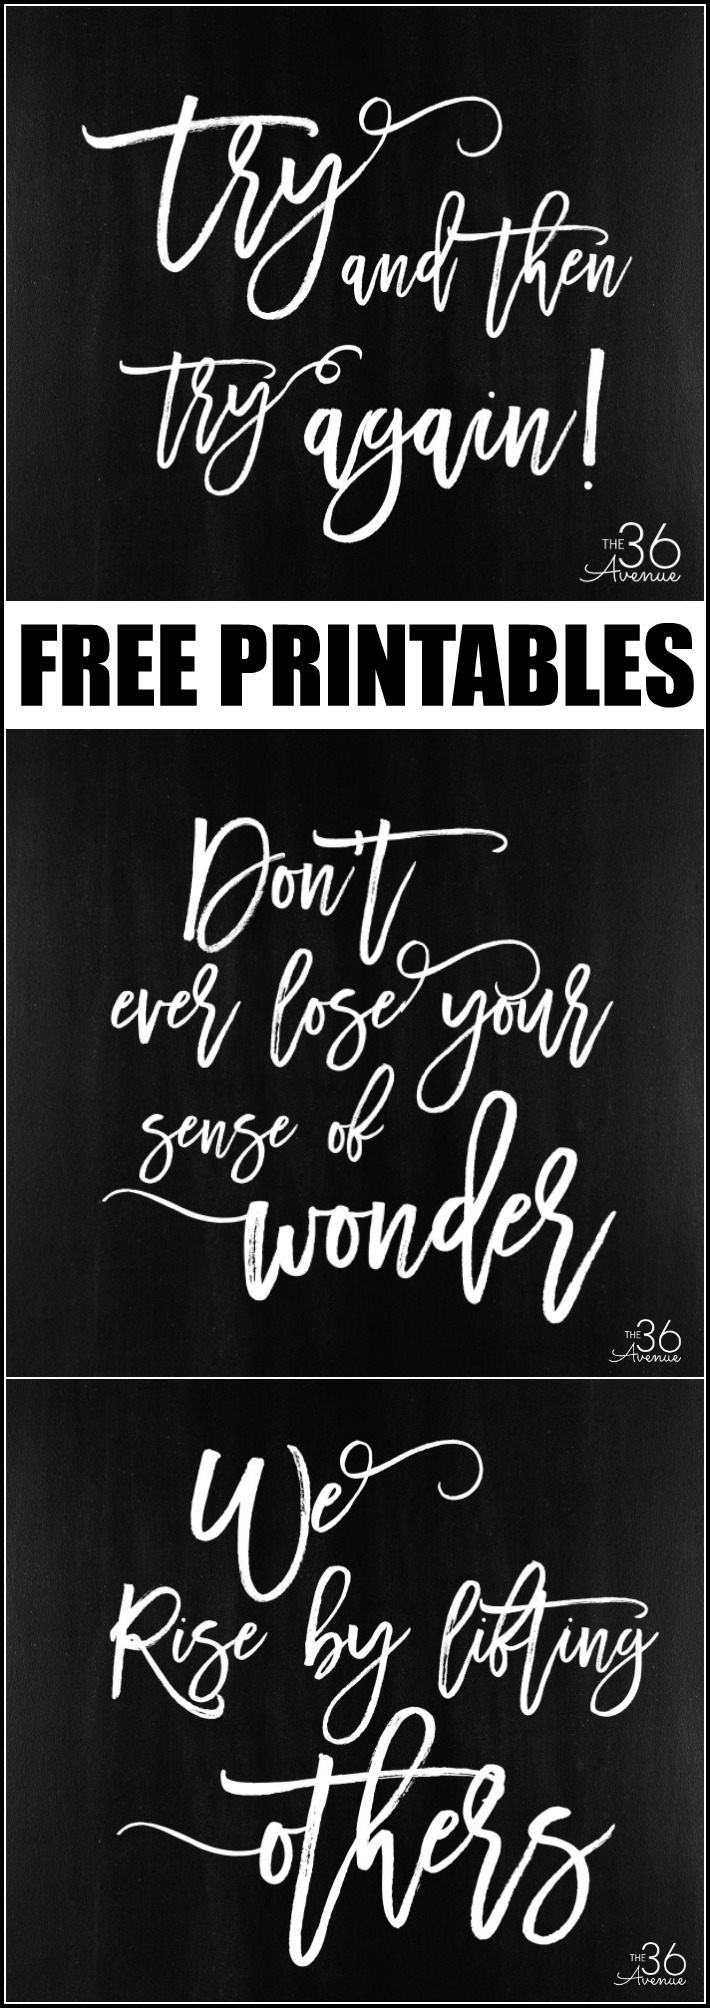 Free Printables at the36thavenue.com